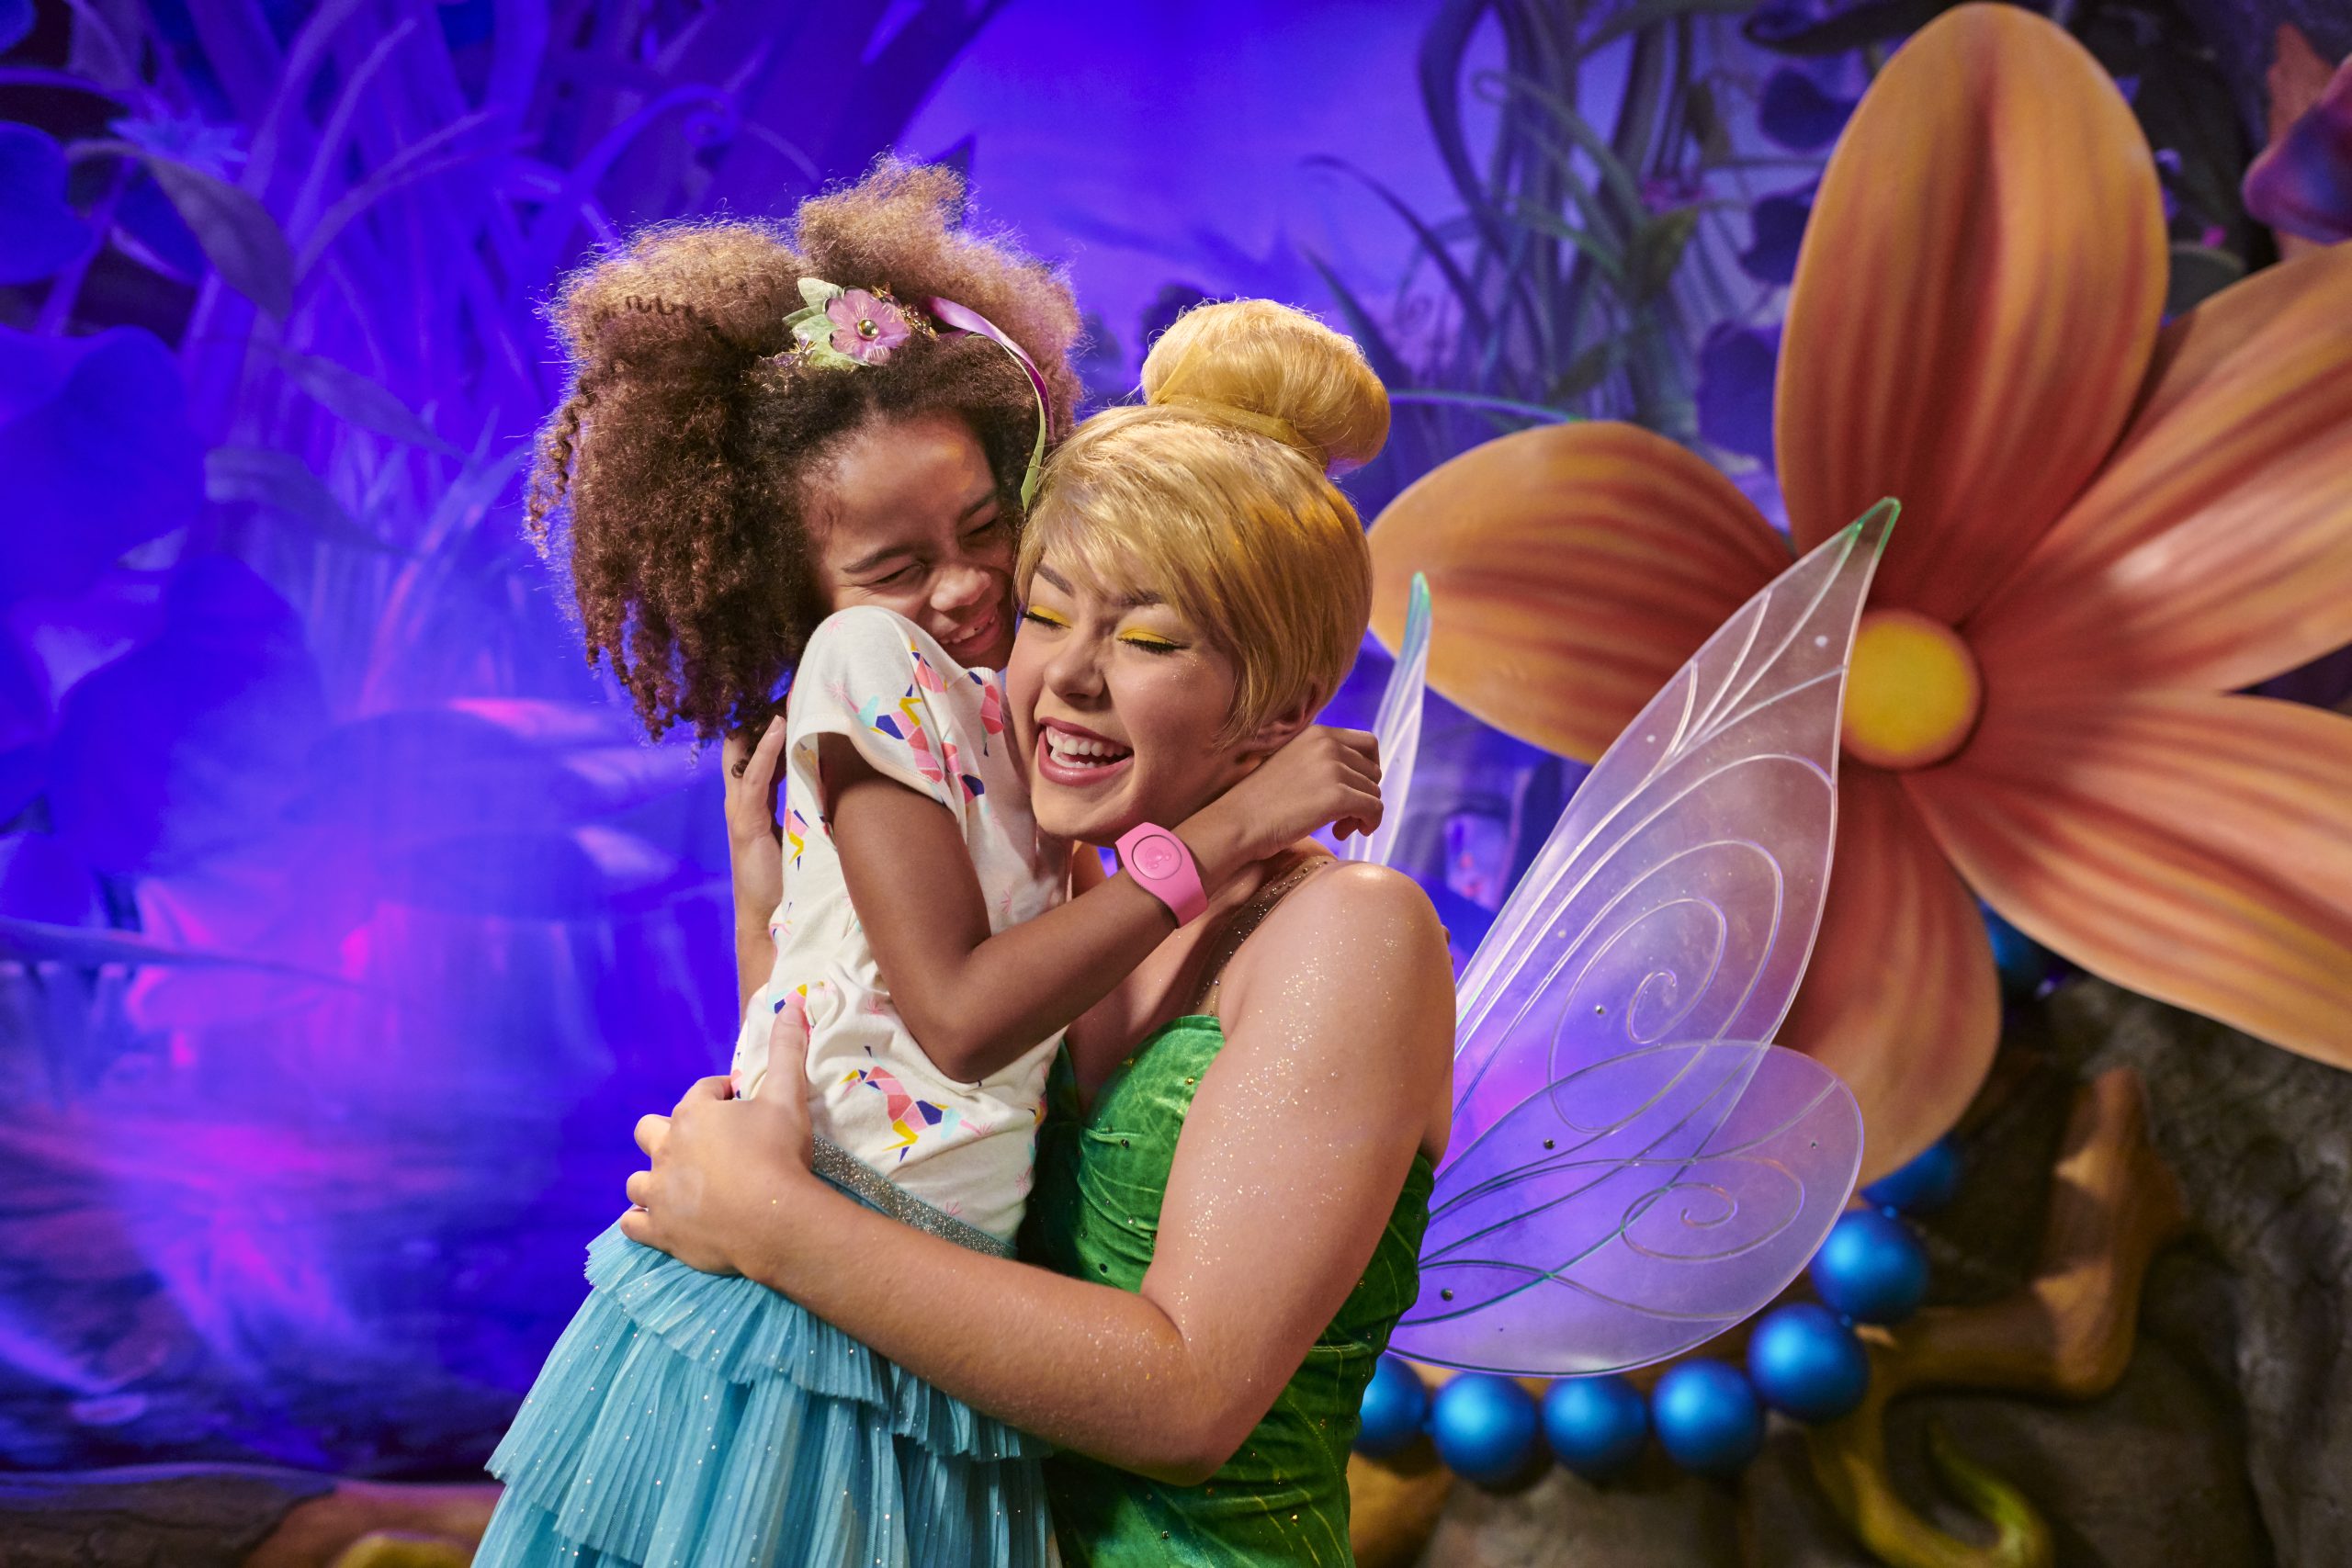 A young Disney Parks guest smiling while hugging a Tinker Bell character performer